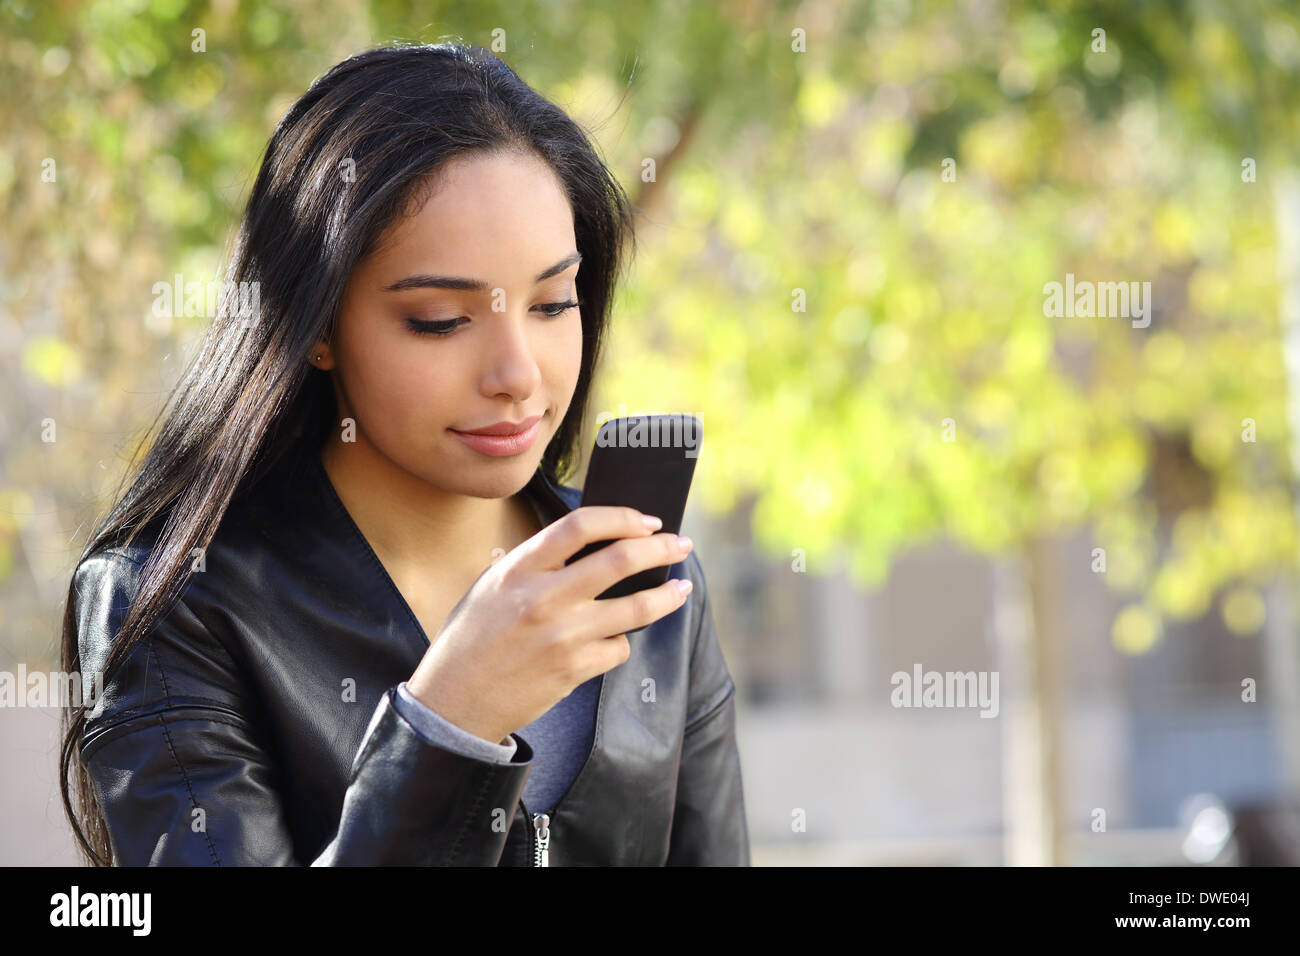 Beautiful woman texting on a smart phone in a park with a green background Stock Photo